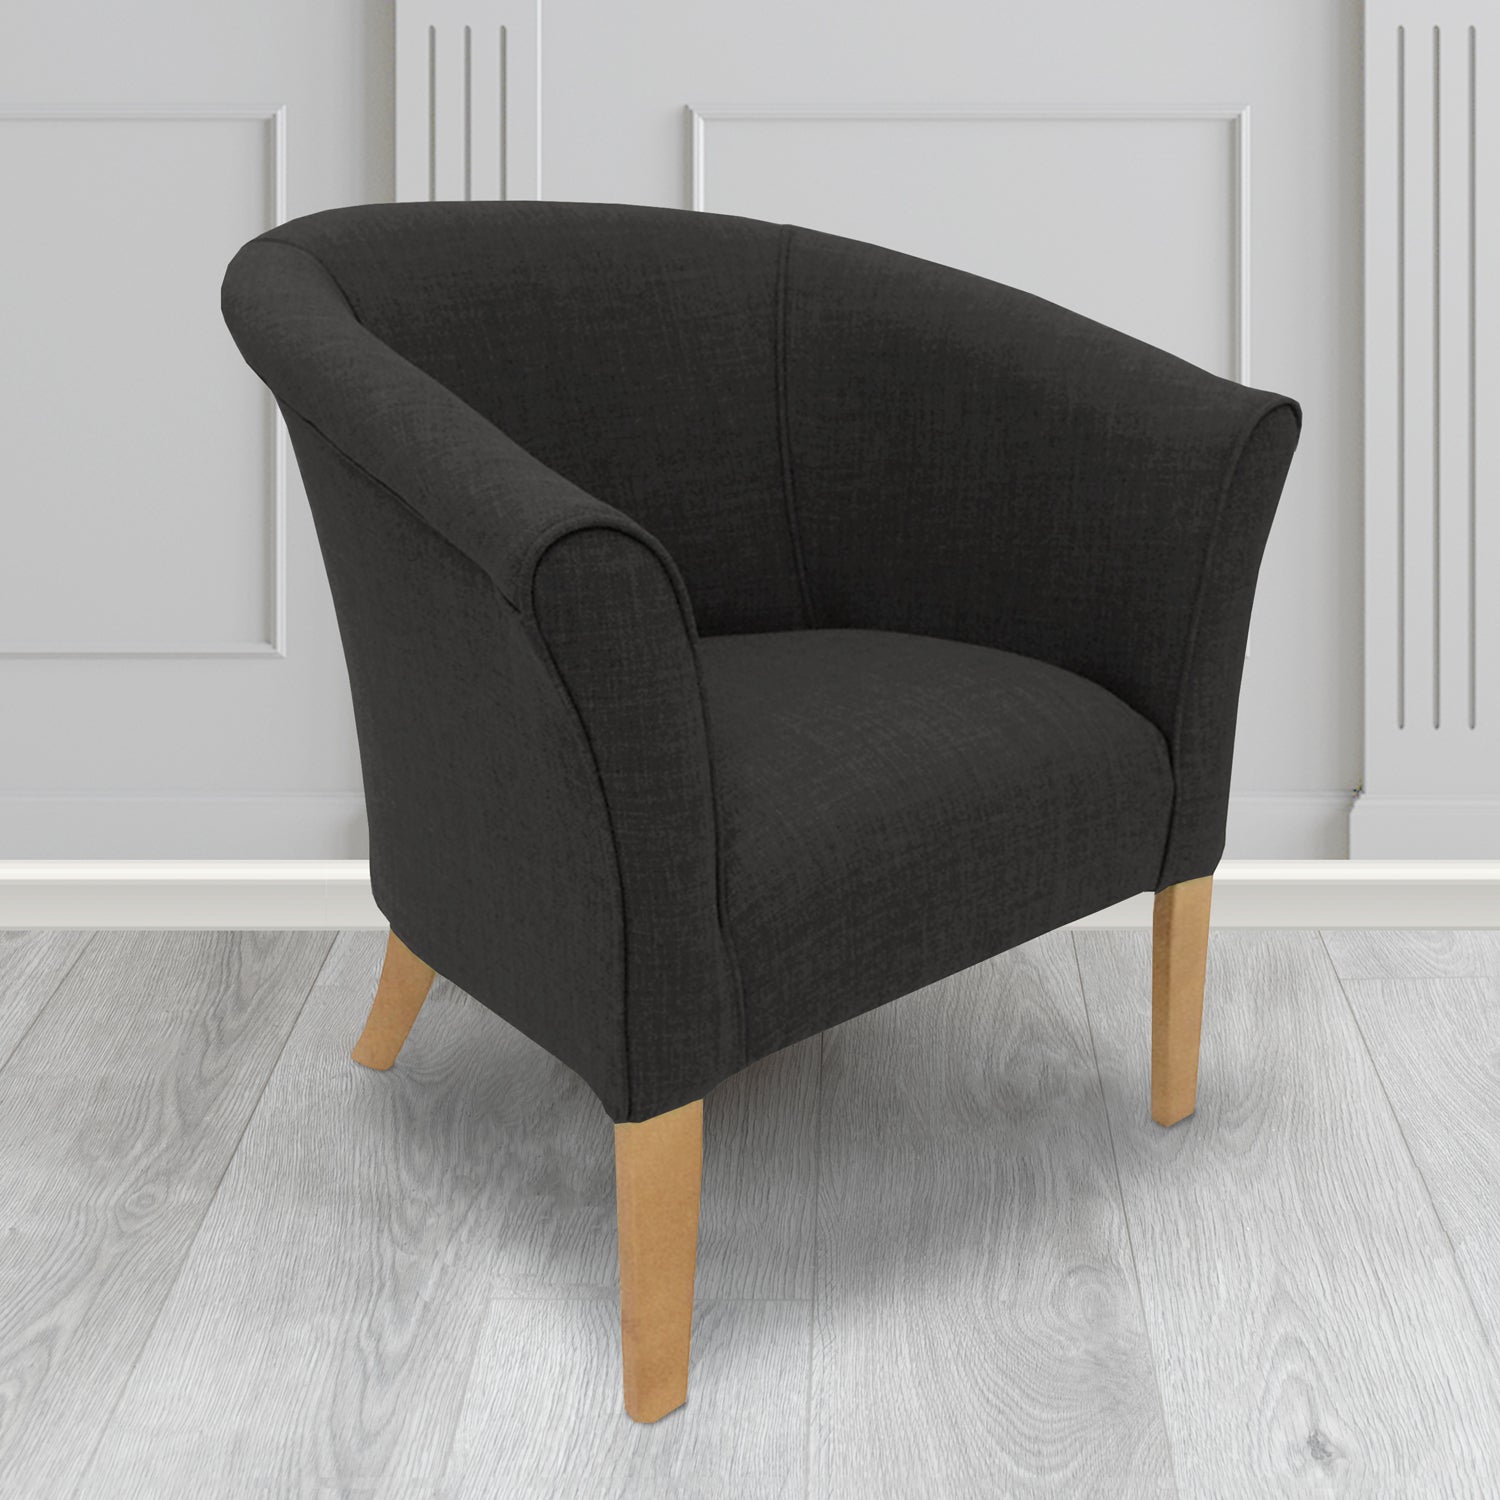 Quill Tub Chair in Linetta Black Crib 5 Plain Fabric - Antimicrobial, Stain Resistant & Waterproof - The Tub Chair Shop